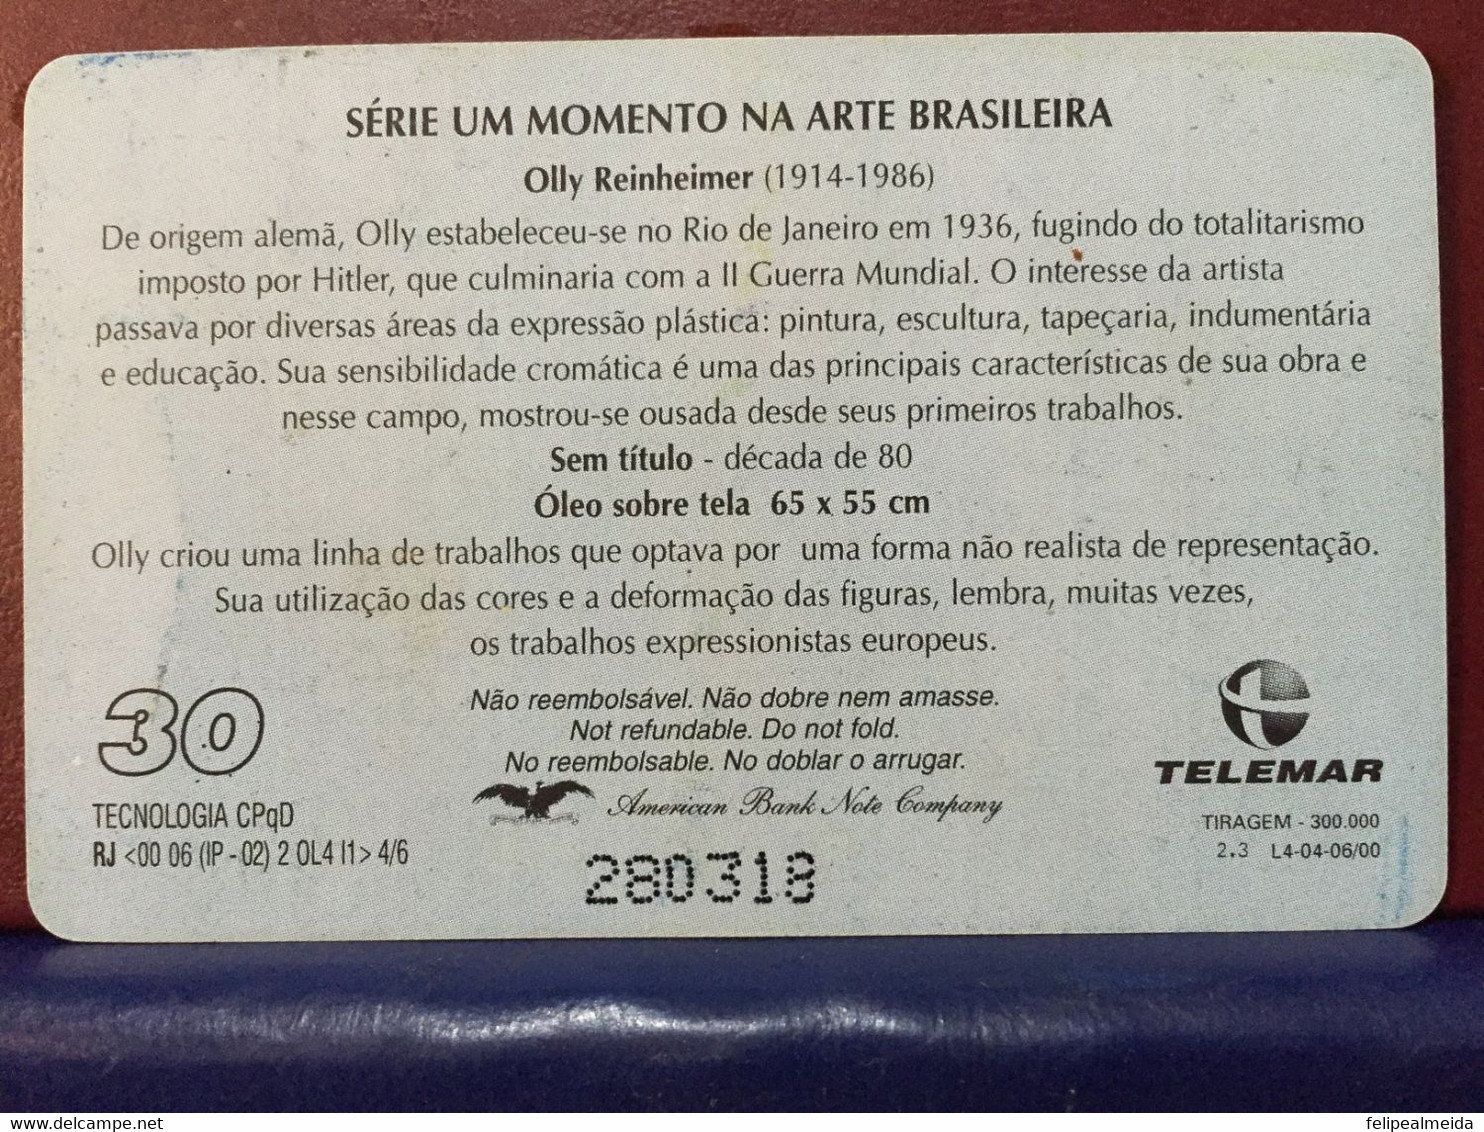 Phone Card Manufactured By Telemar In 2000 - Series A Moment In Brazilian Art - Artist Olly Reinheimer - Pittura